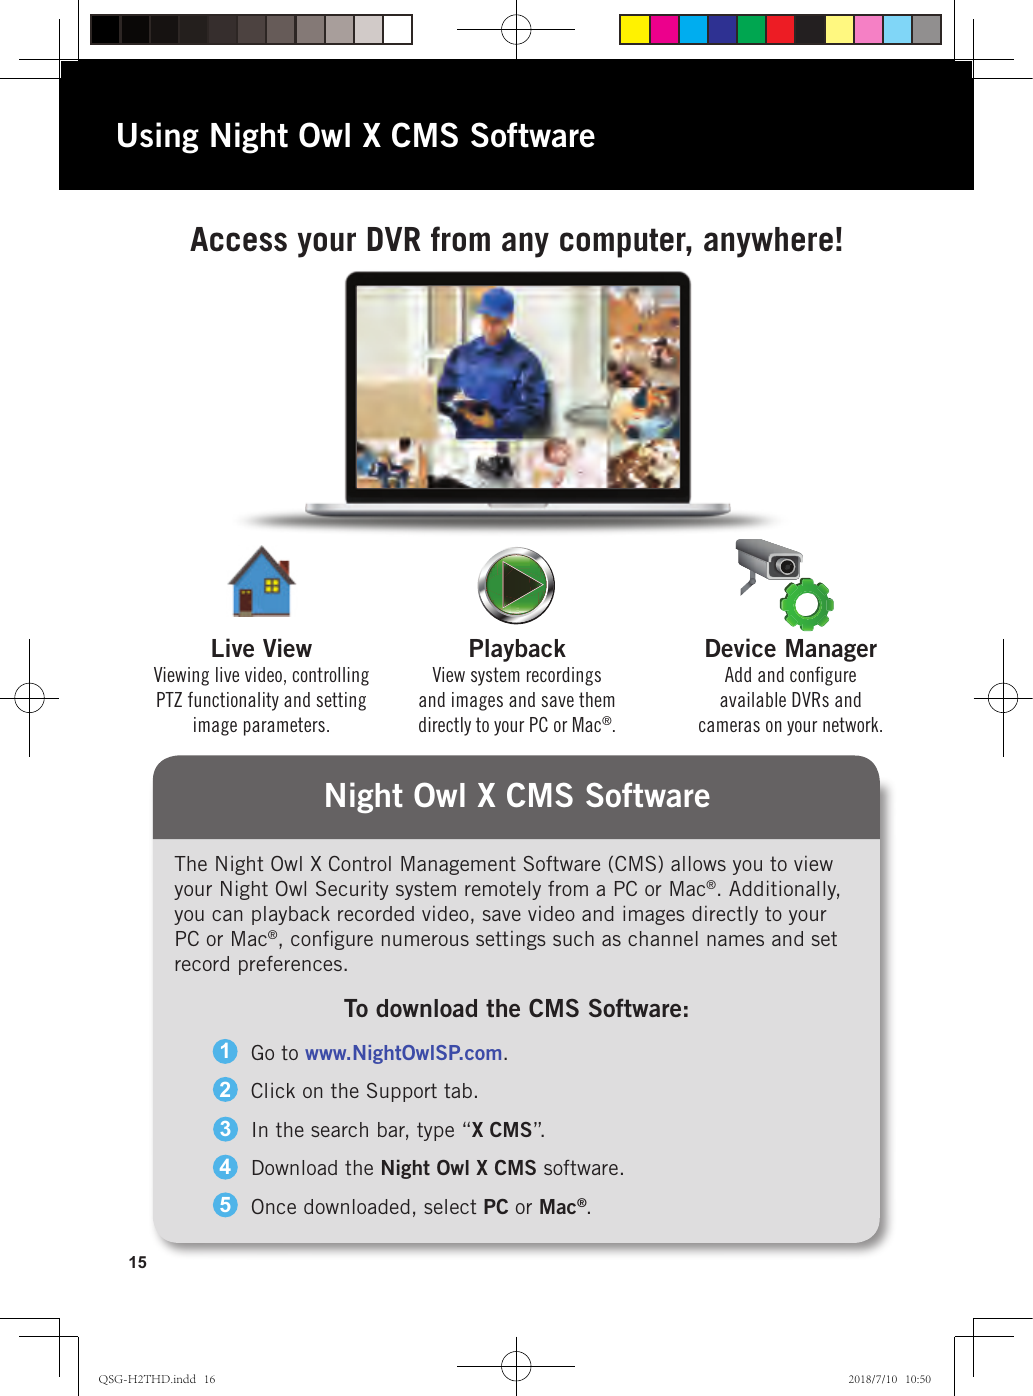 15Night Owl X CMS SoftwareAccess your DVR from any computer, anywhere!Device ManagerAdd and conﬁgure available DVRs and cameras on your network.PlaybackView system recordings and images and save them directly to your PC or Mac®.Live ViewViewing live video, controlling PTZ functionality and setting image parameters.Using Night Owl X CMS SoftwareThe Night Owl X Control Management Software (CMS) allows you to view your Night Owl Security system remotely from a PC or Mac®. Additionally, you can playback recorded video, save video and images directly to your PC or Mac®, conﬁgure numerous settings such as channel names and set record preferences.Go to www.NightOwlSP.com.Click on the Support tab.In the search bar, type “X CMS”.Download the Night Owl X CMS software.Once downloaded, select PC or Mac®.12345To download the CMS Software:QSG-H2THD.indd   16 2018/7/10   10:50